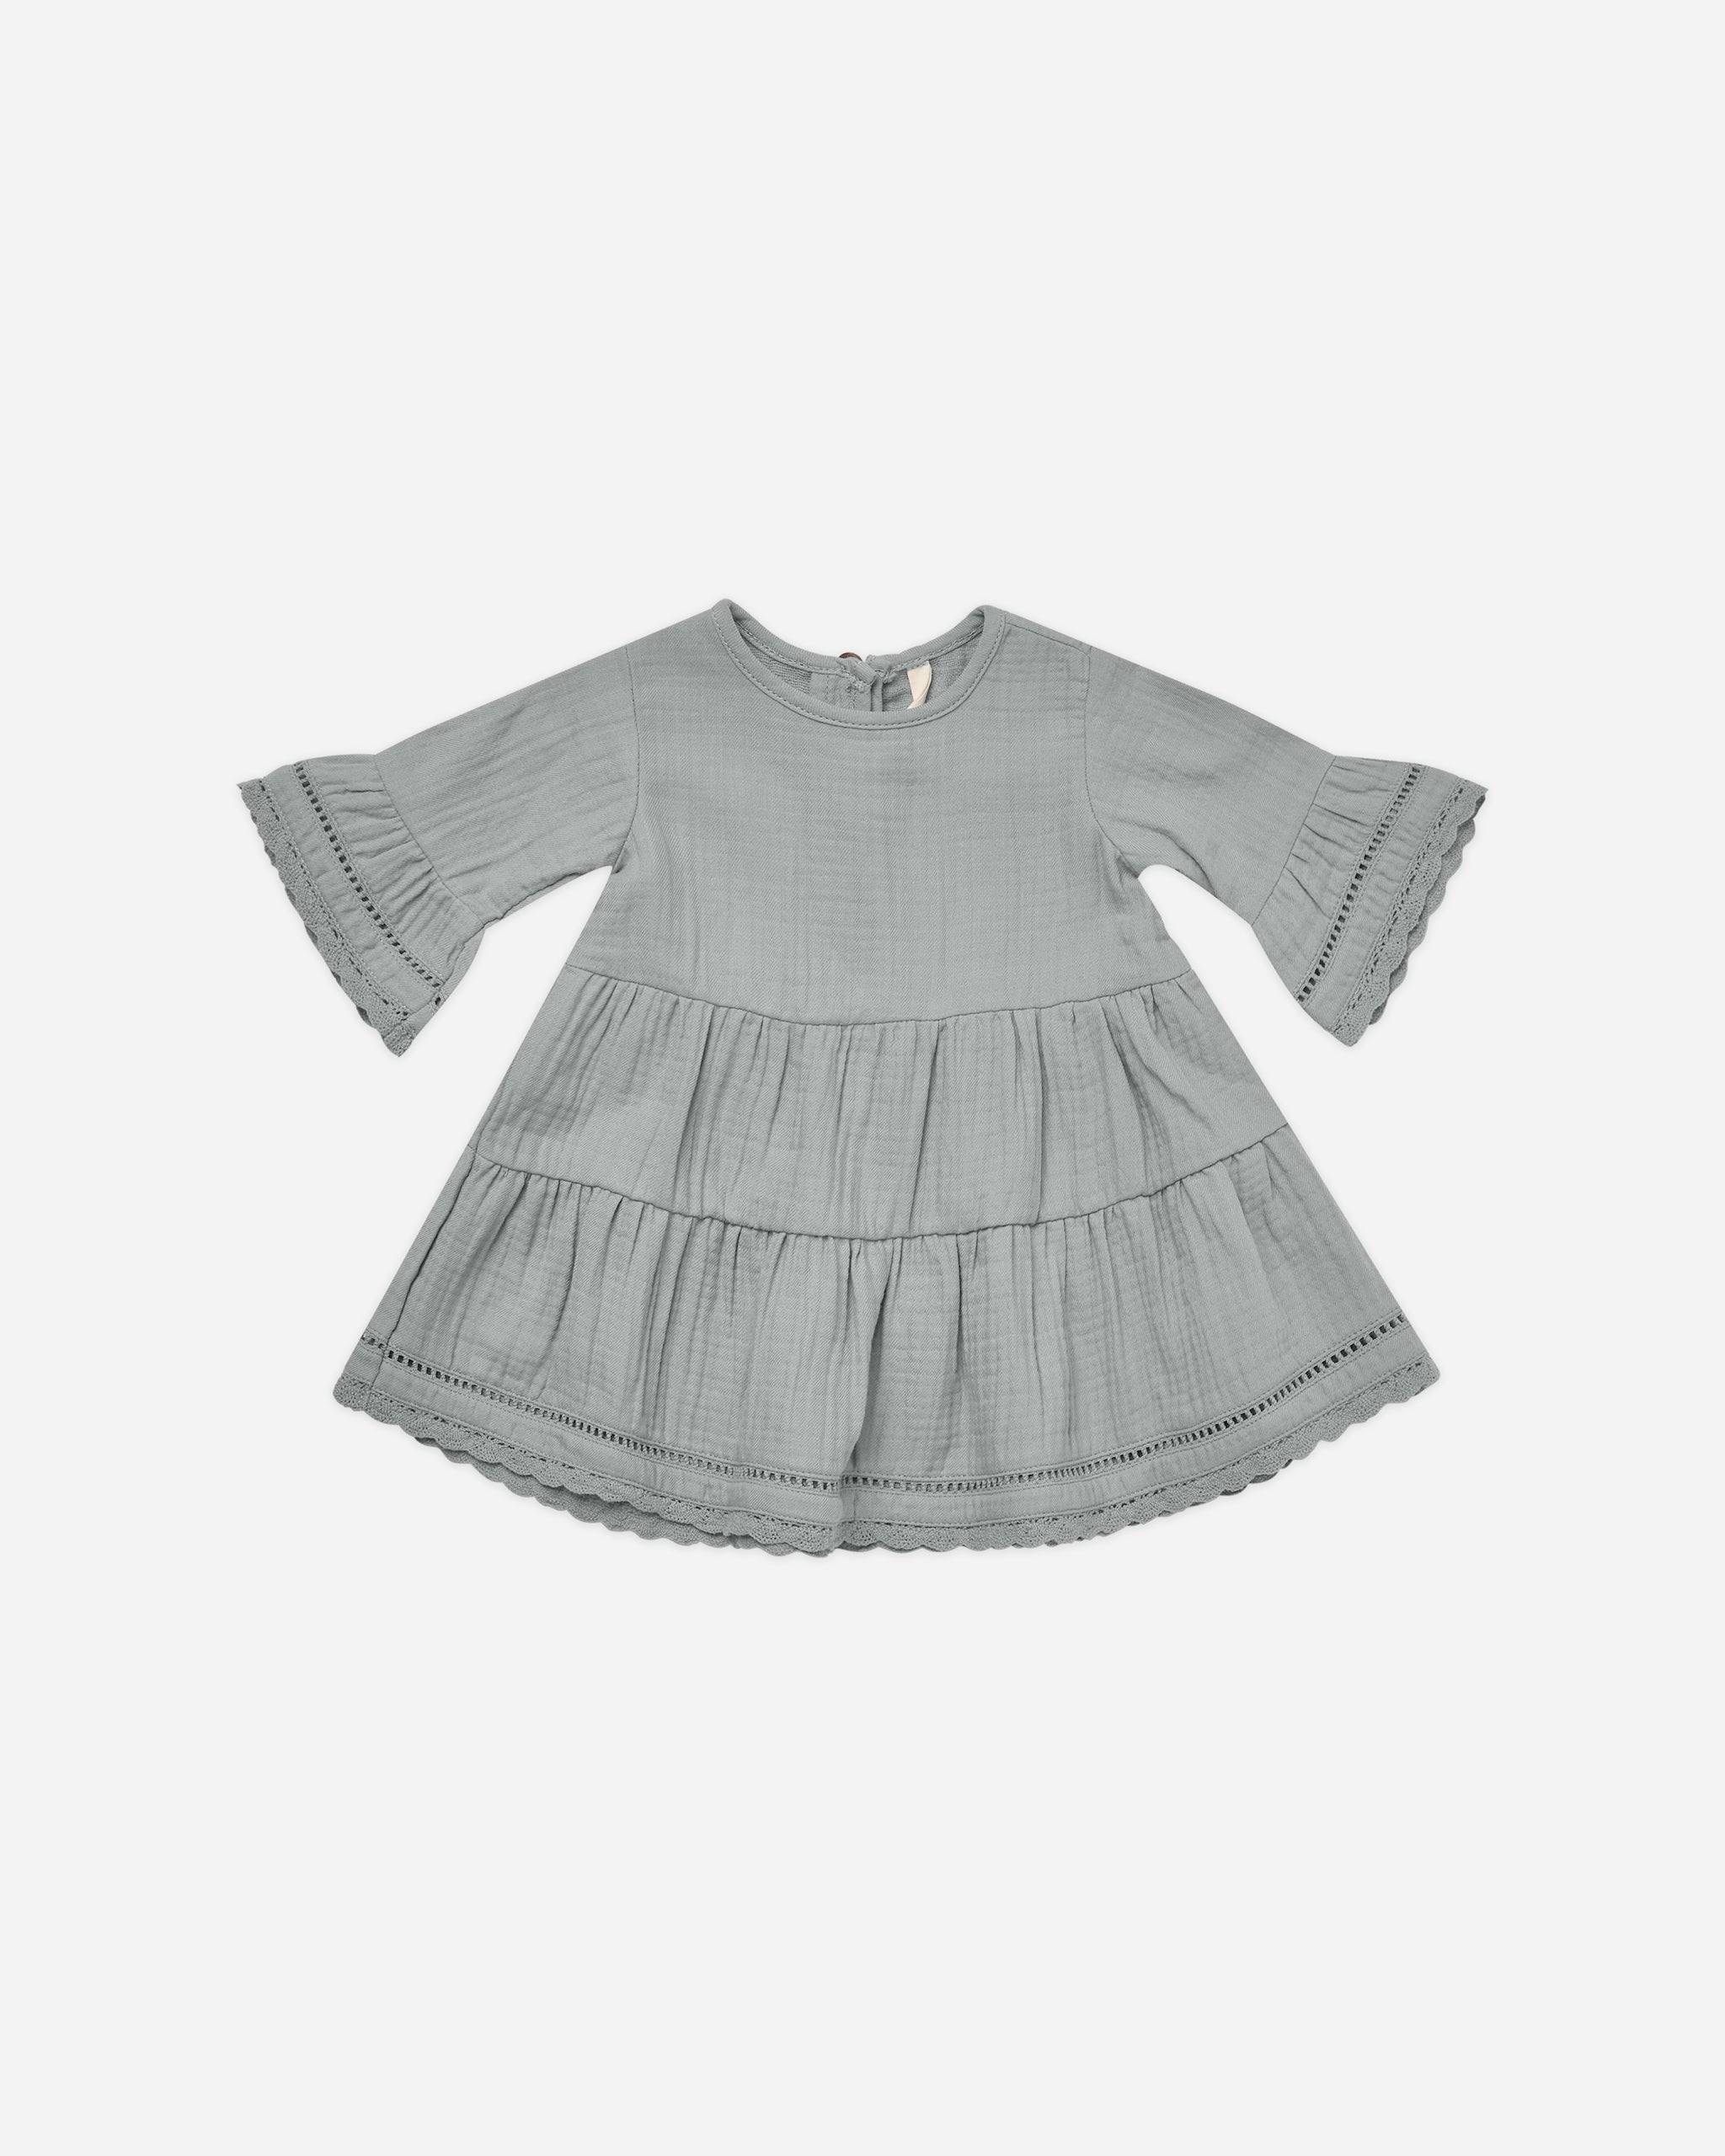 Belle Dress || Dusty Blue - Rylee + Cru | Kids Clothes | Trendy Baby Clothes | Modern Infant Outfits |